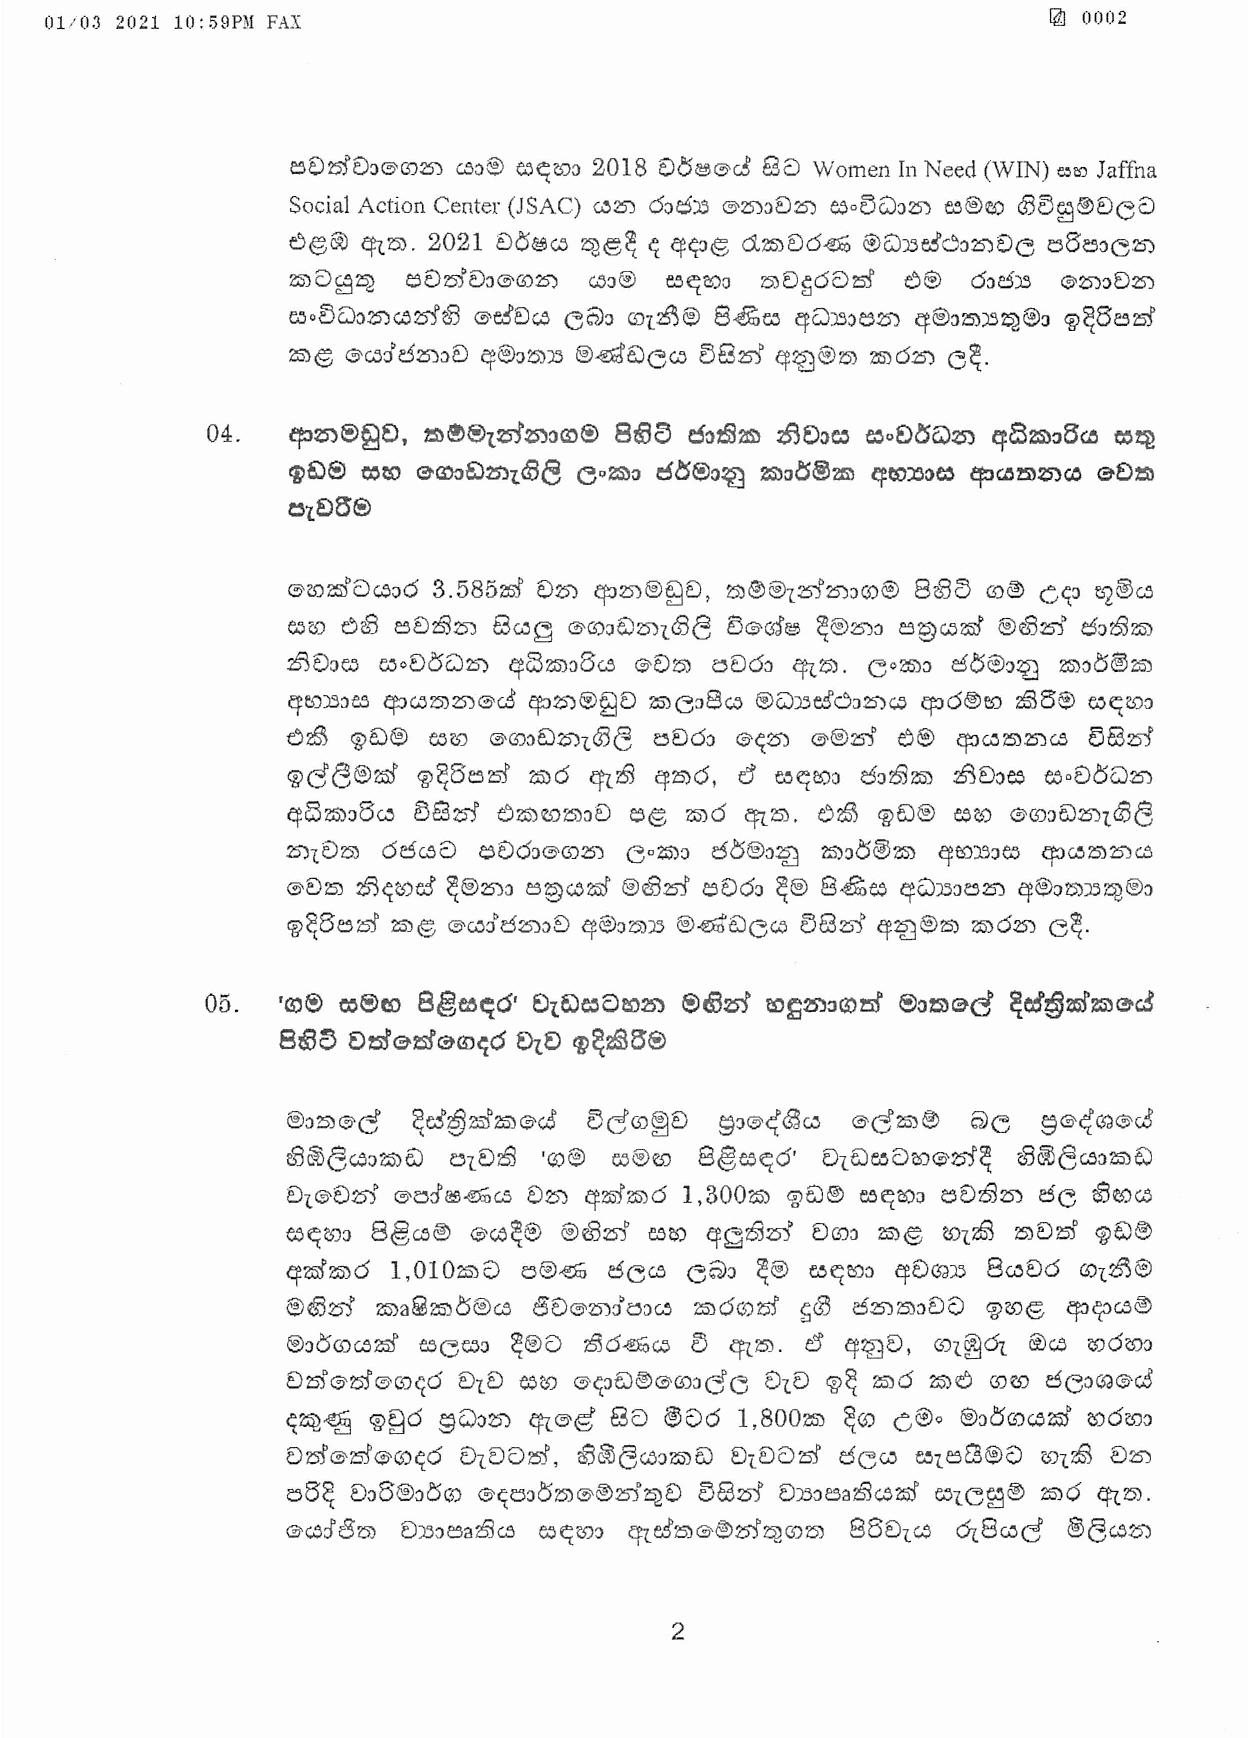 Cabinet Decision on 01.03.2021 page 002